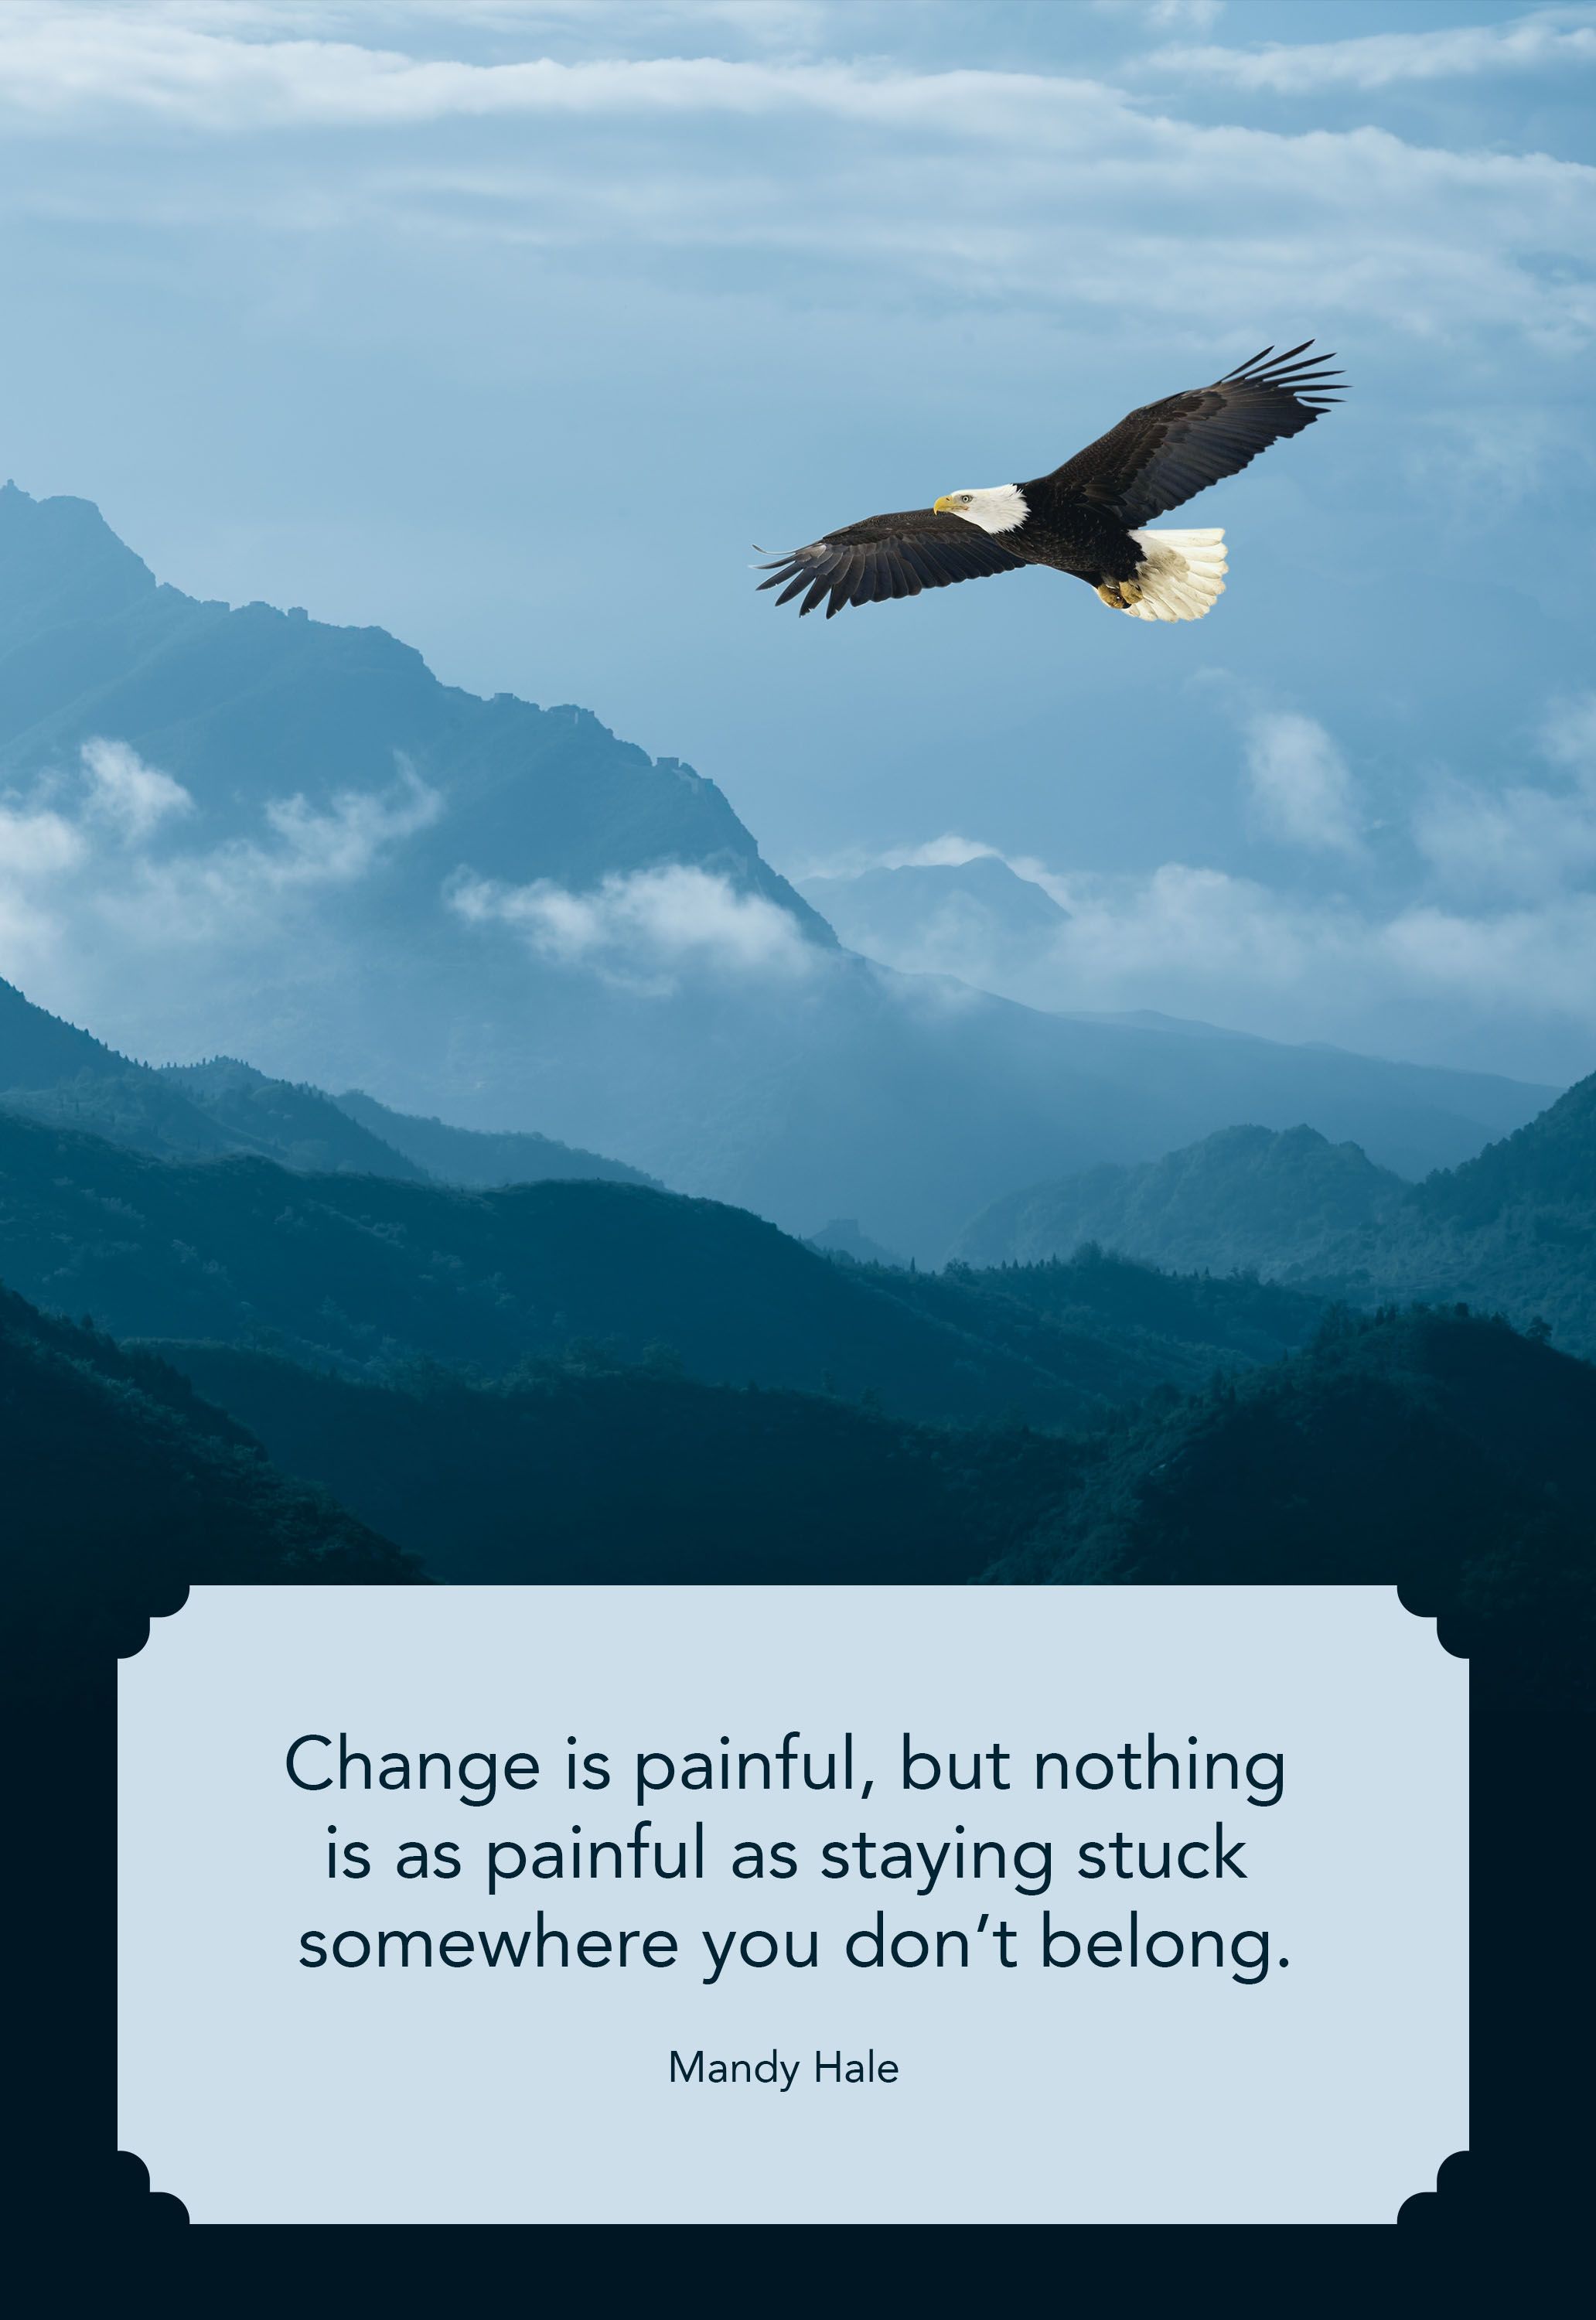 35 Best Quotes About Change - Inspiring Sayings to Navigate Life ...